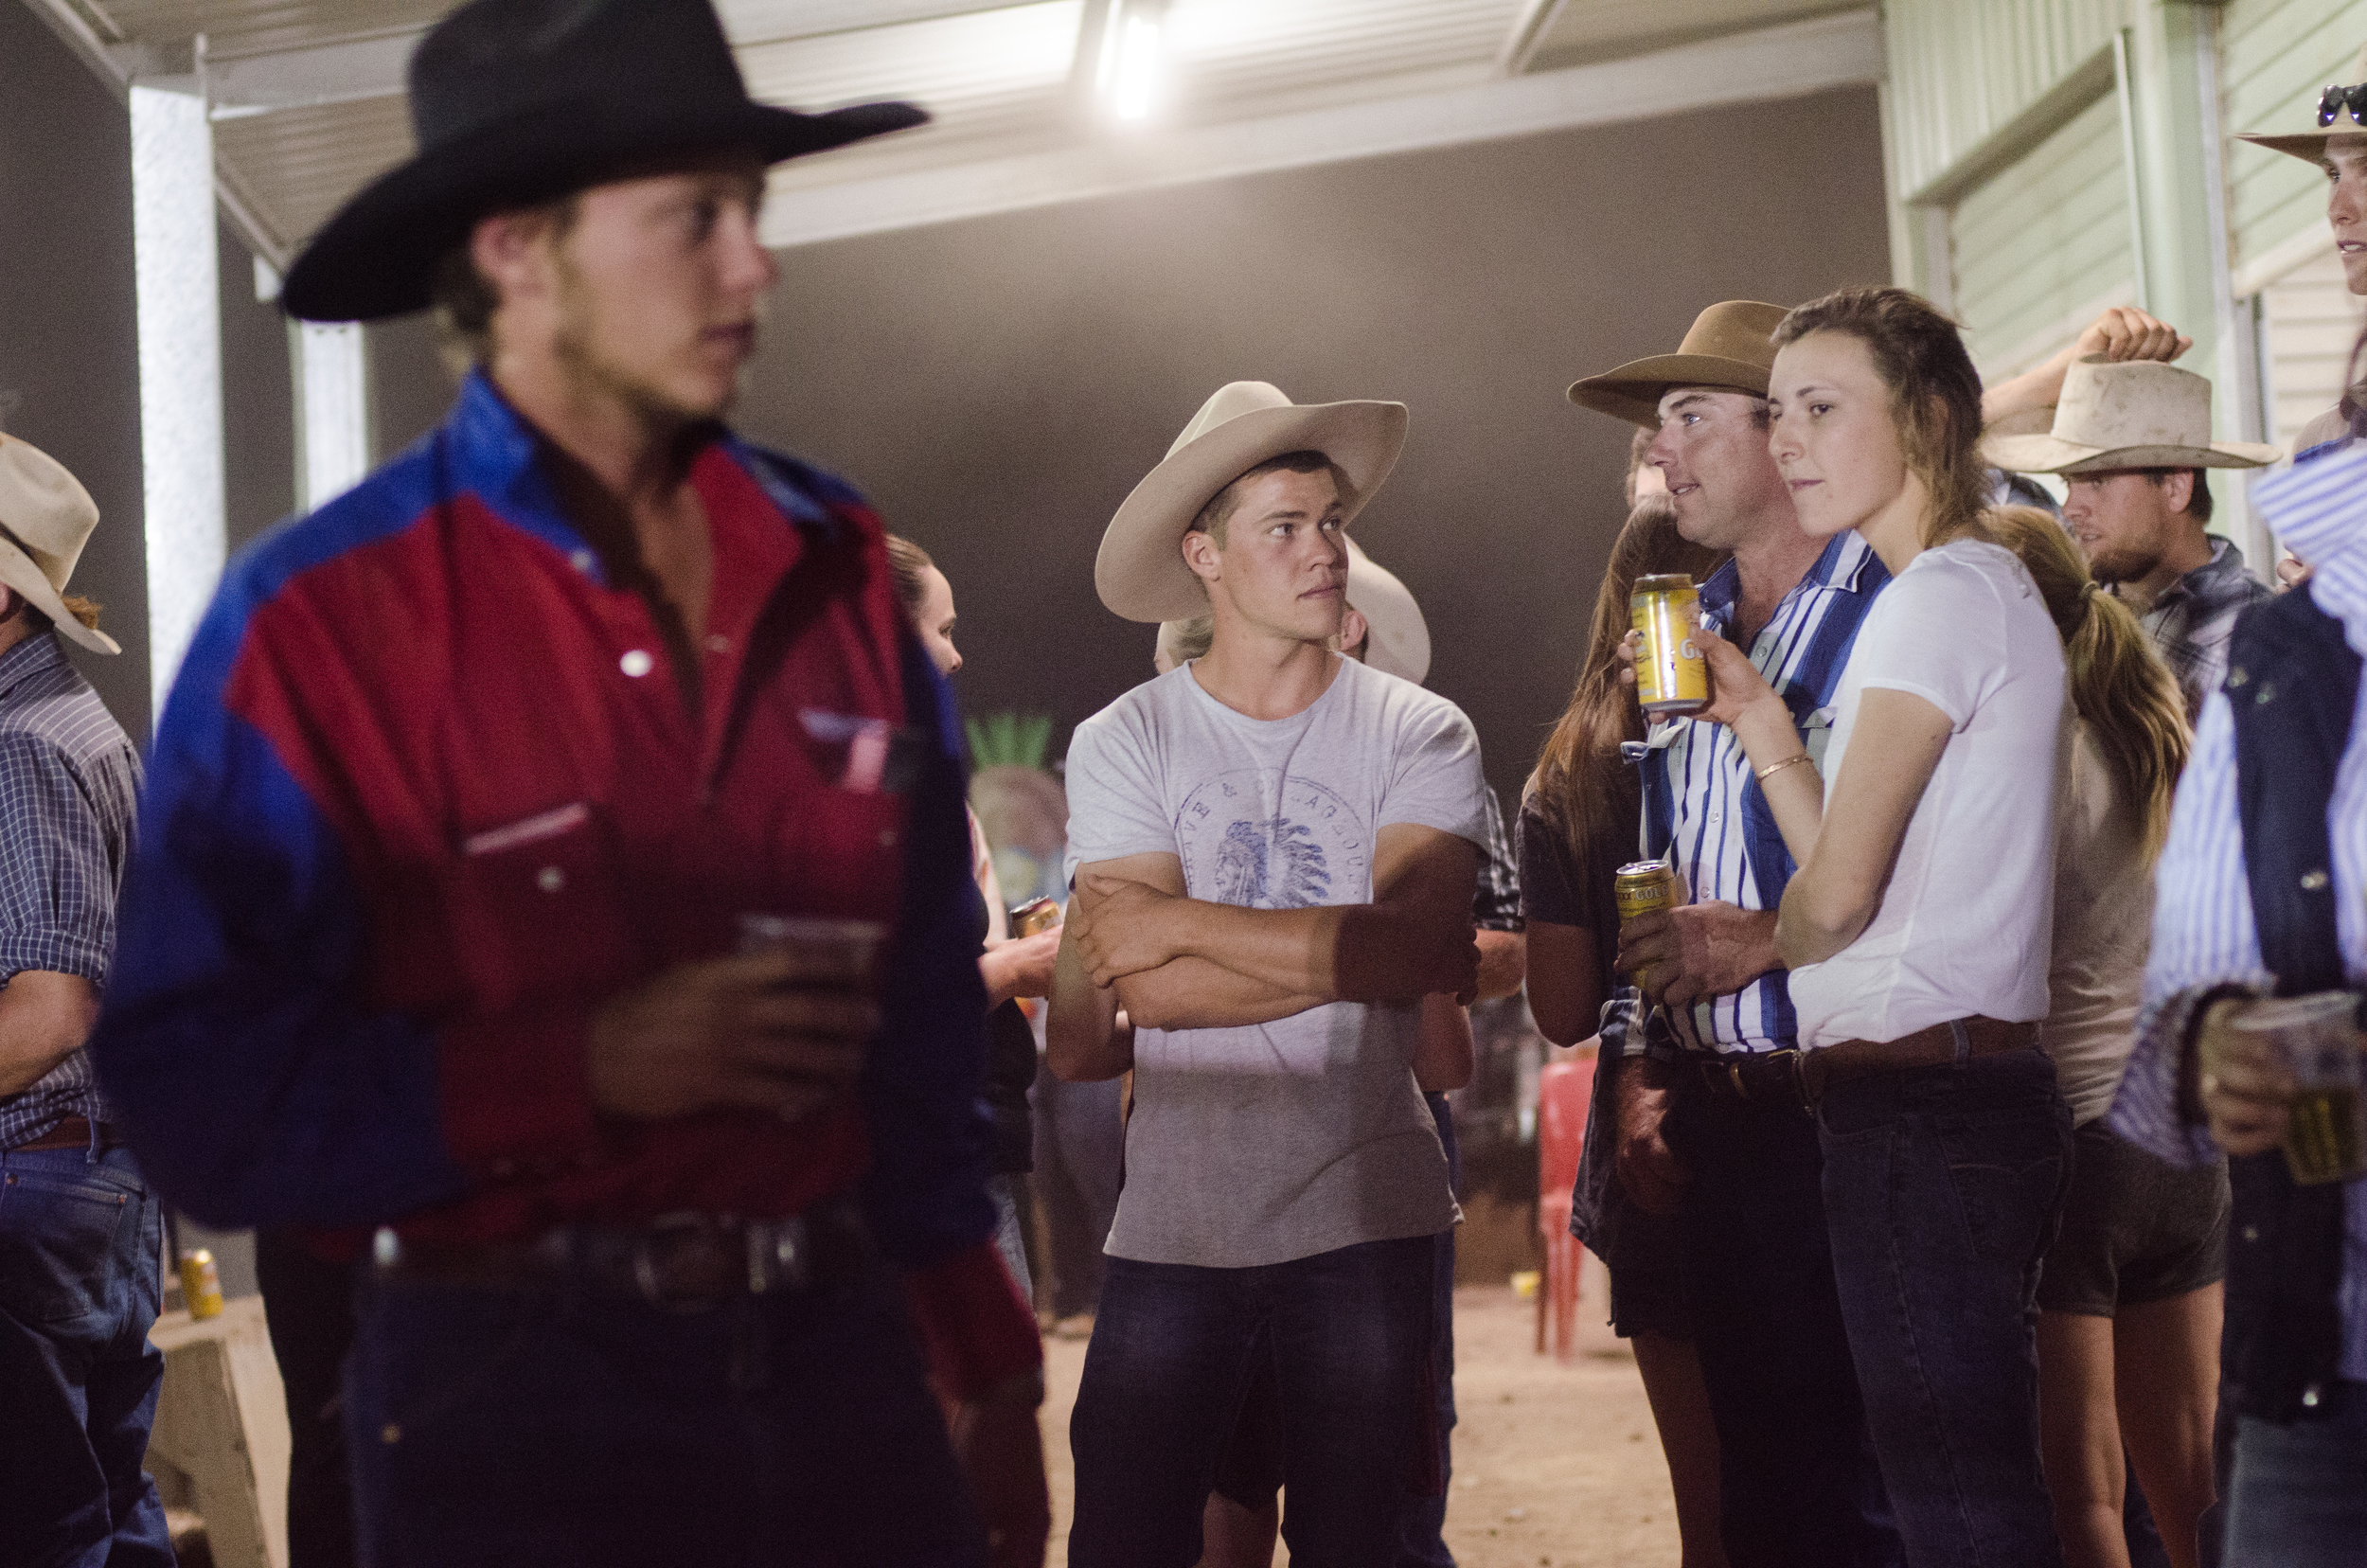  With a population of 188 the town makes rodeo one of their main attractions during the year. 